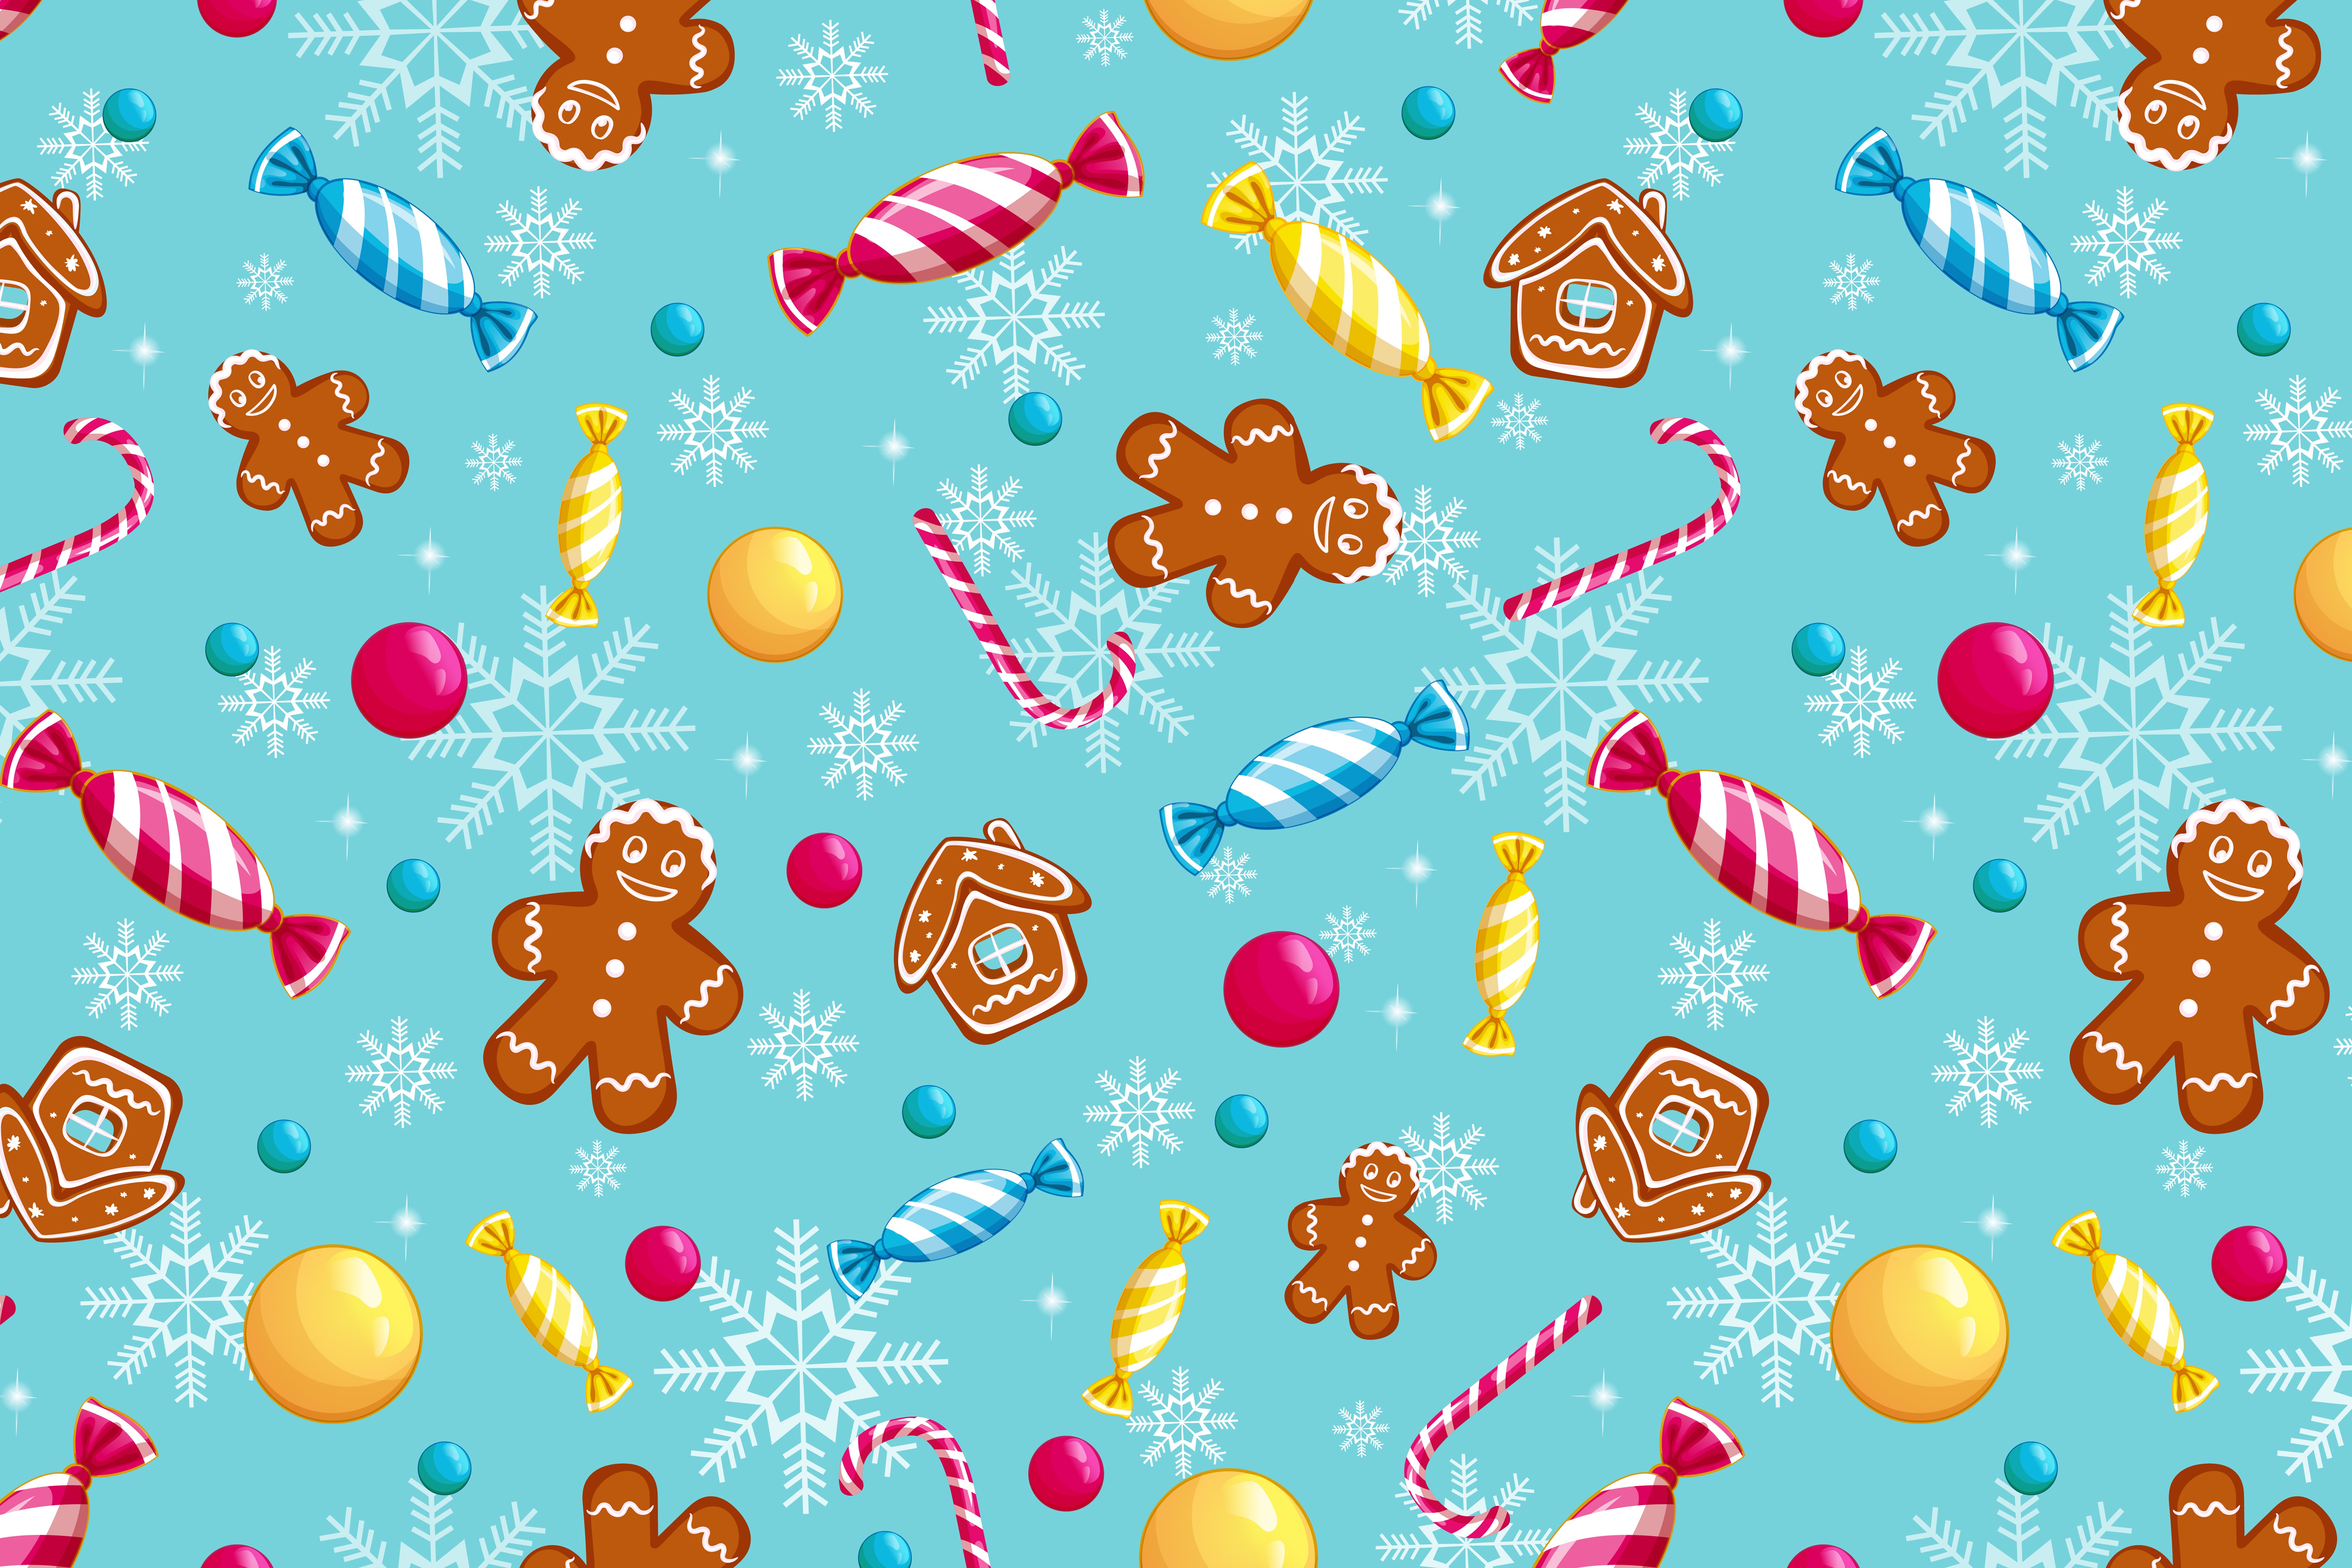 Candy Cane Gingerbread Man Candy Pattern Minimalism Sweets Christmas Snowflakes 6000x4000